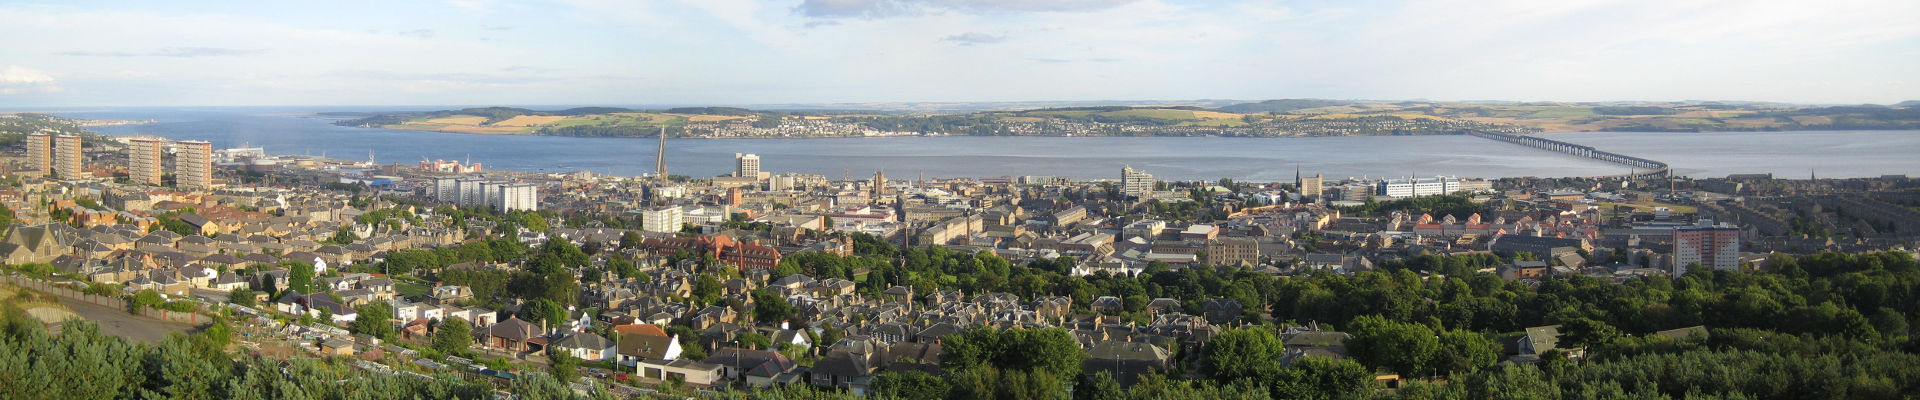 In the heart of dundee